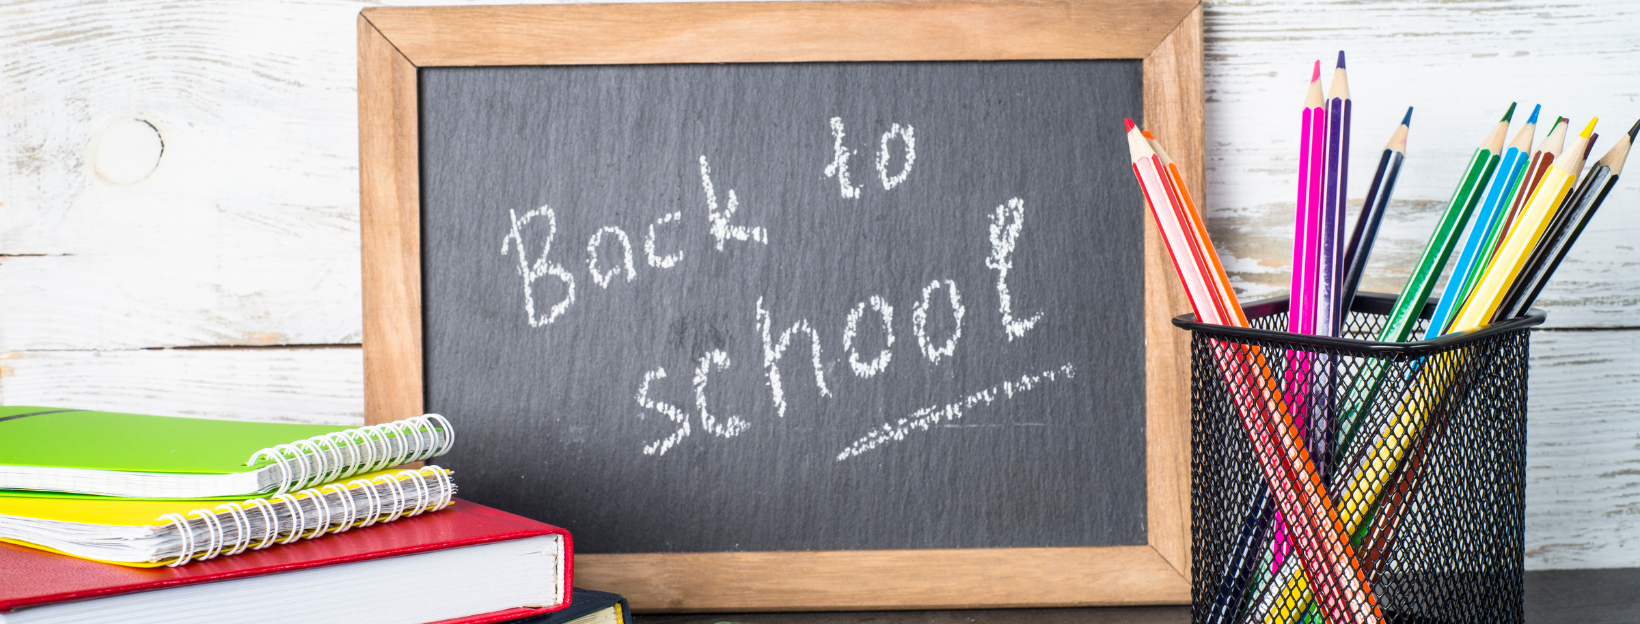 Getting Back-To-School Made Easy